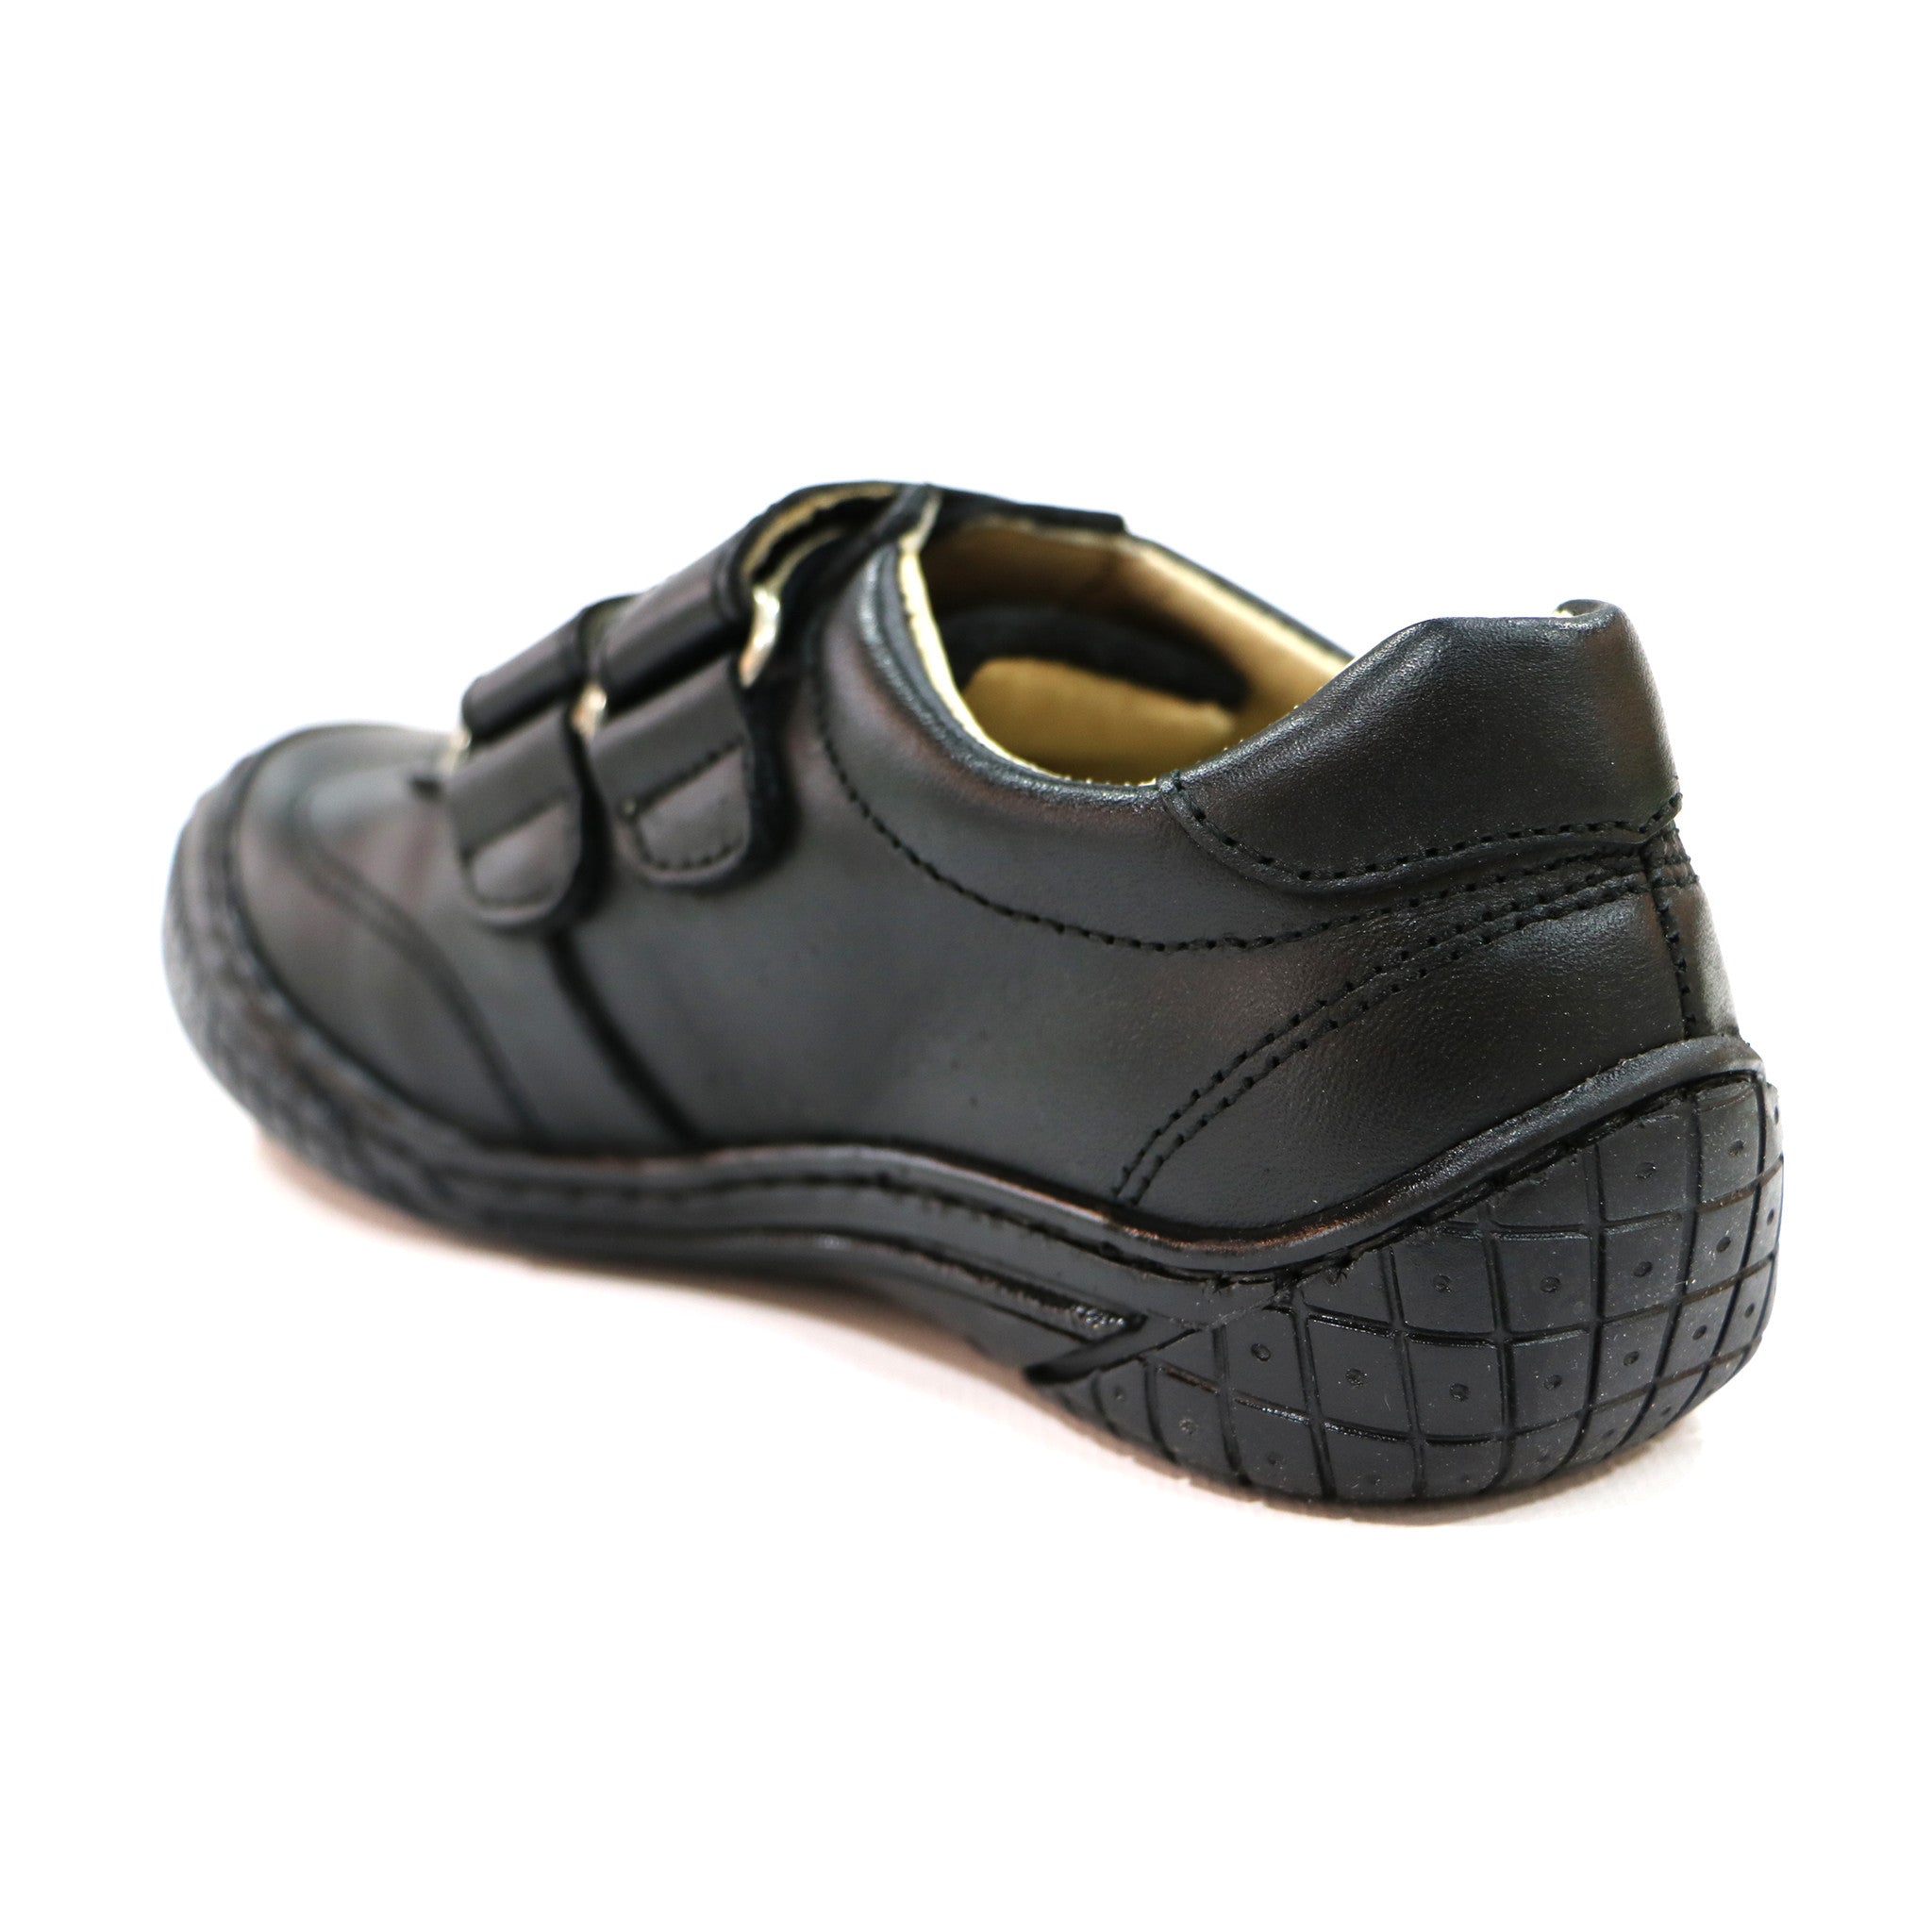 school shoes for boys near me